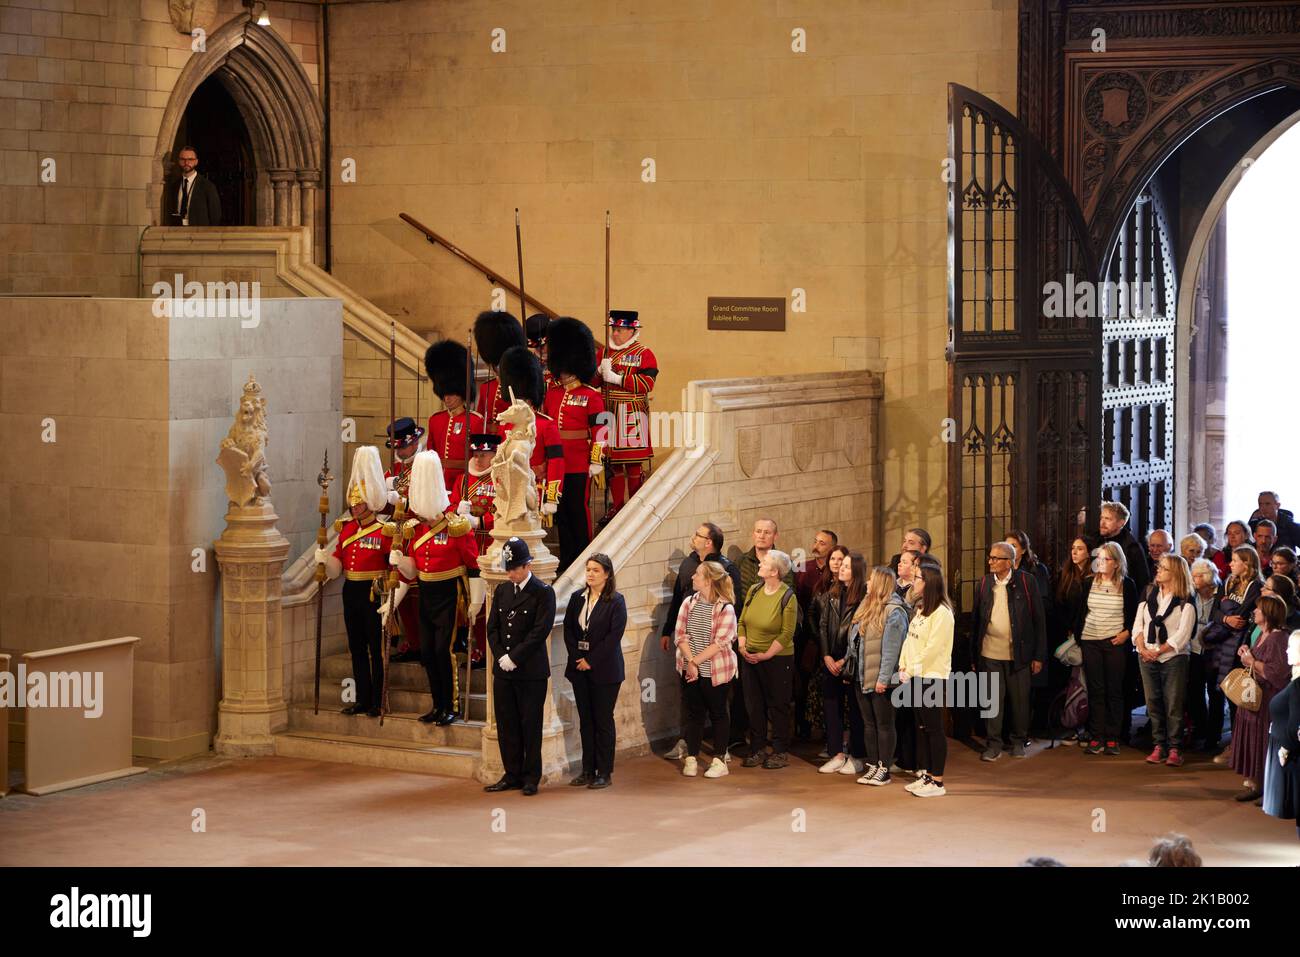 London, UK. 17th Sep, 2022. Queen Elizabeth II lying in state as the nation gets the opportunity to pay their last respects. Royal guards, taken from units that serve the Royal households, maintain a 24-hour vigil next to the Queen's casket. Westminster Hall at the Palace of Westminster London. UK. Credit: Phil Crow/Alamy Live News Stock Photo